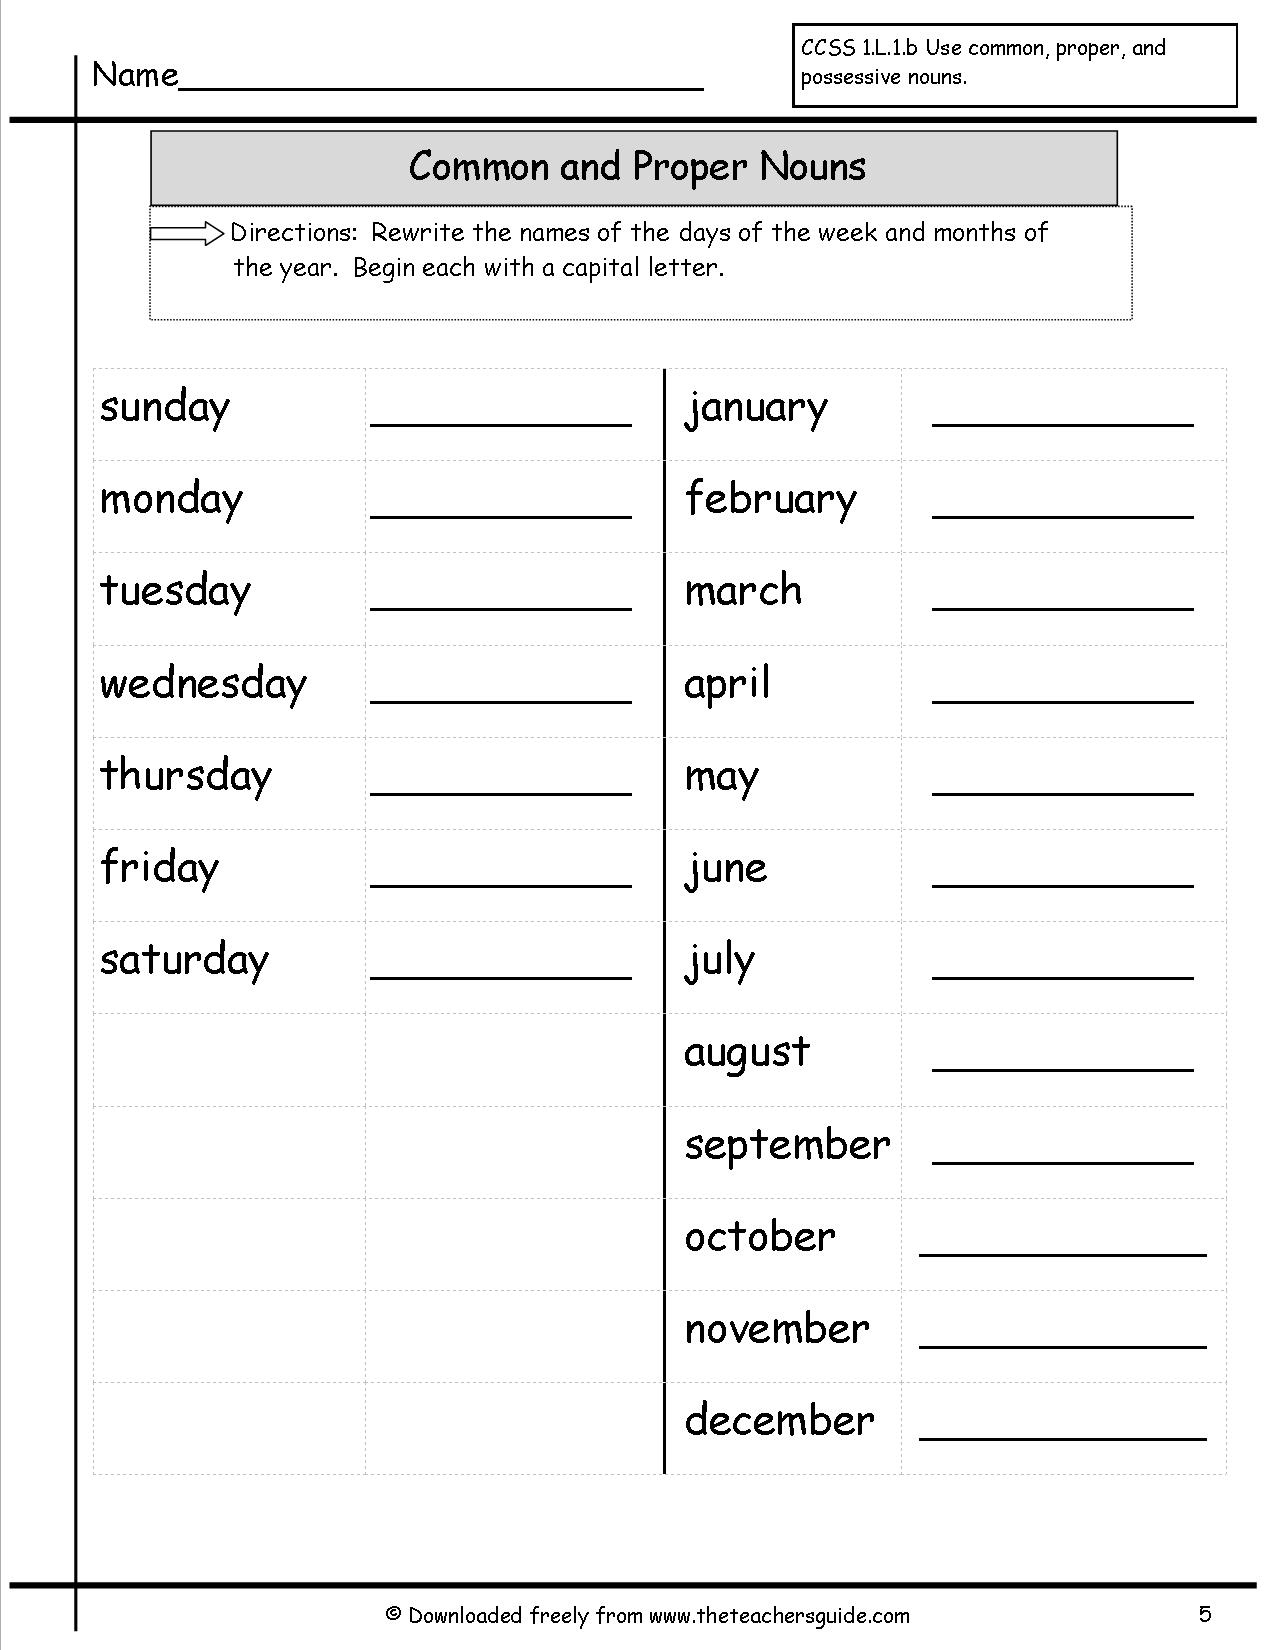 Common And Proper Nouns Worksheets From The Teacher&amp;#039;s Guide | Common And Proper Nouns Printable Worksheets